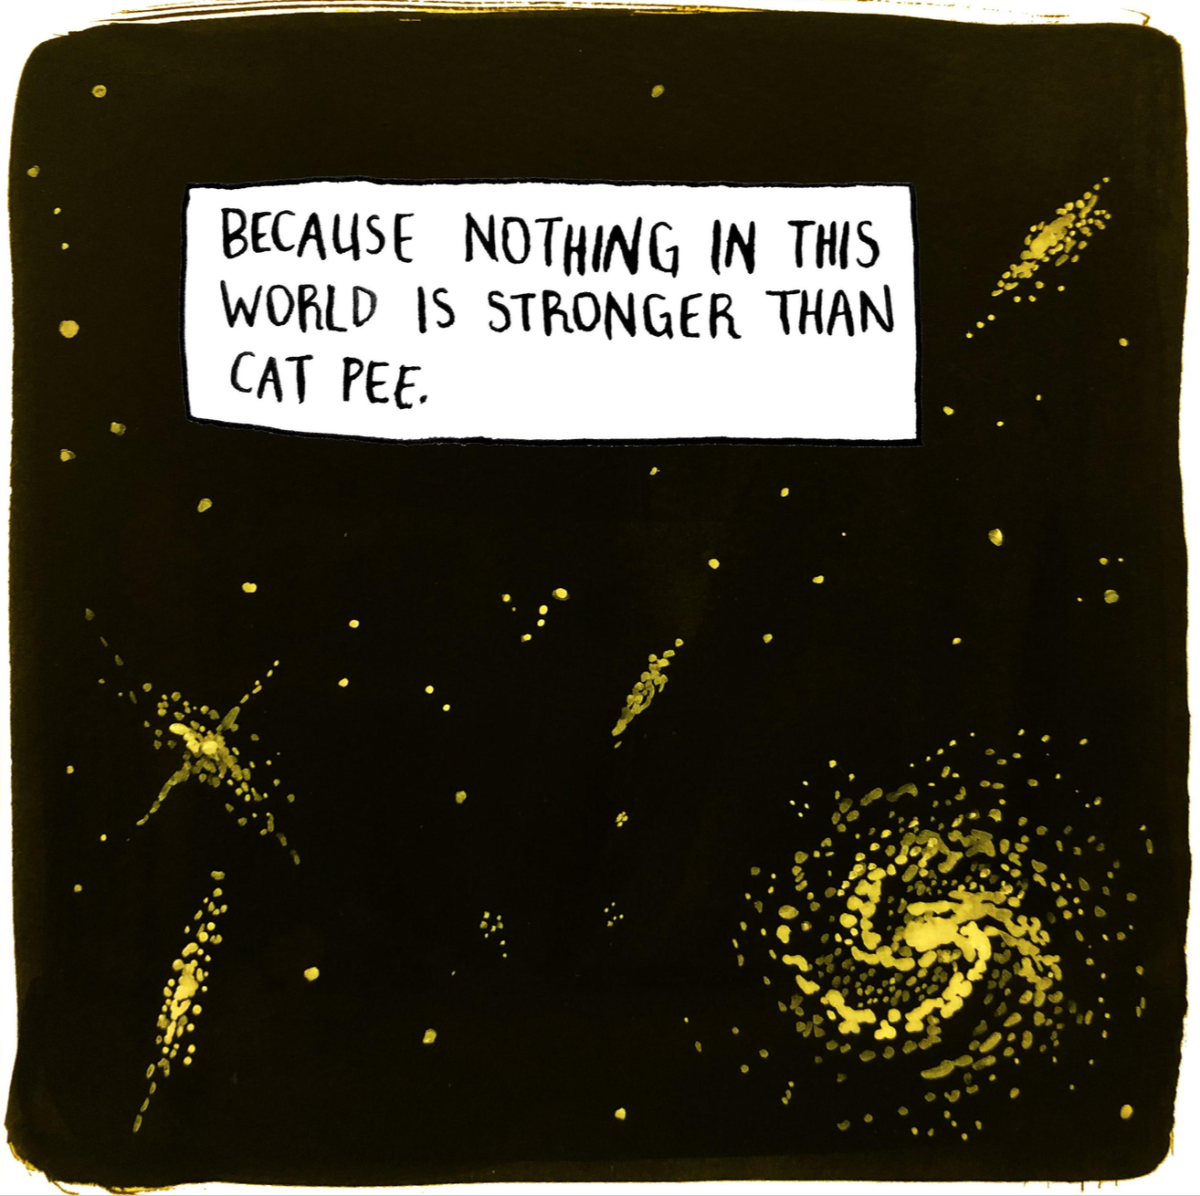 "Because nothing in this world is stronger than cat pee."